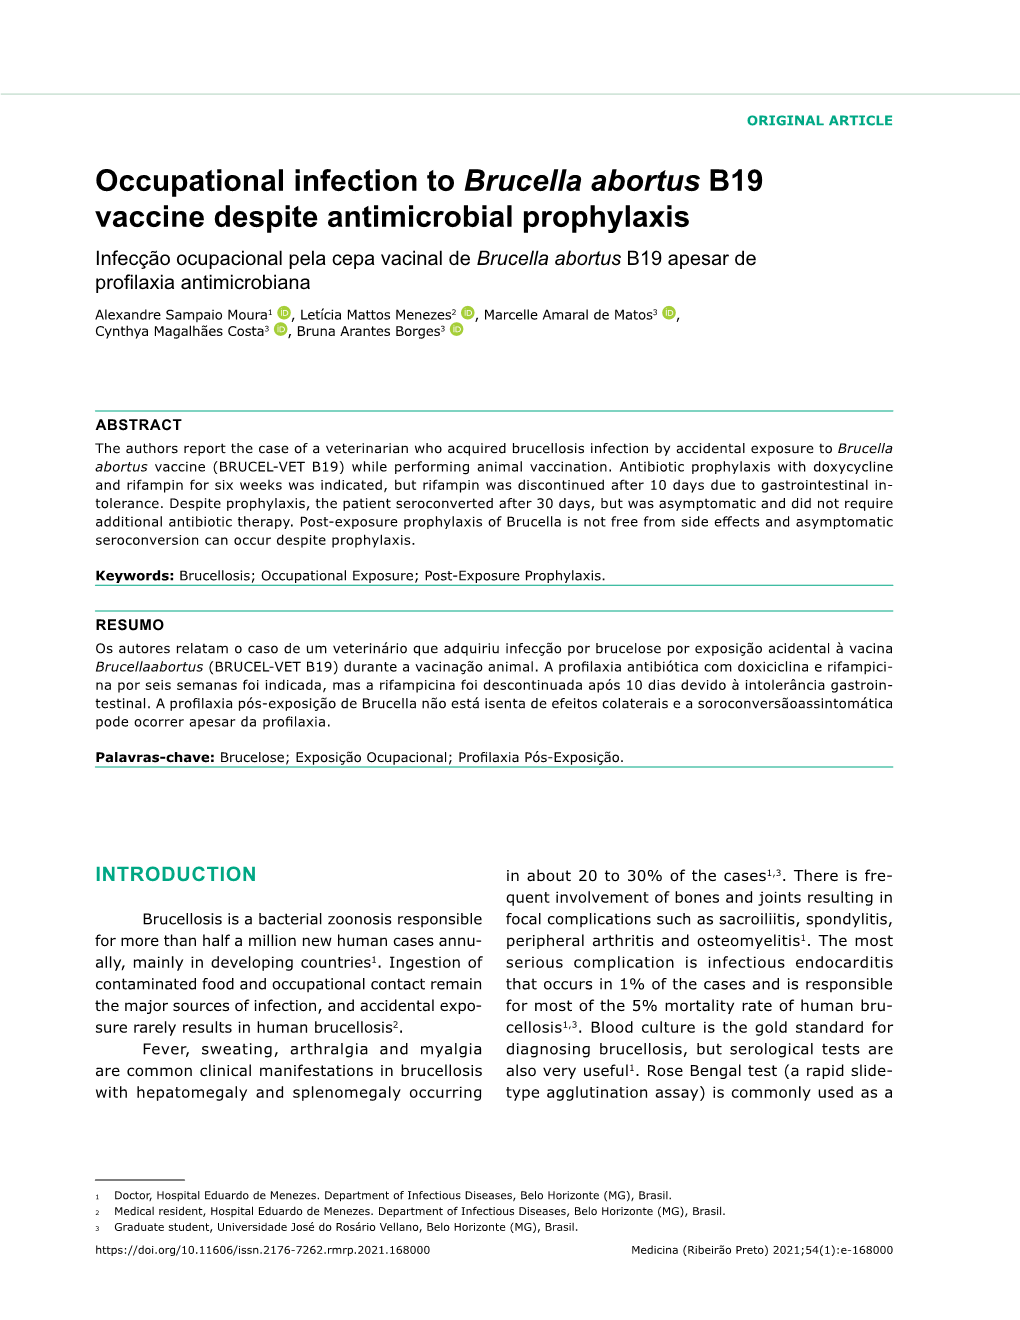 Occupational Infection to Brucella Abortus B19 Vaccine Despite Antimicrobial Prophylaxis